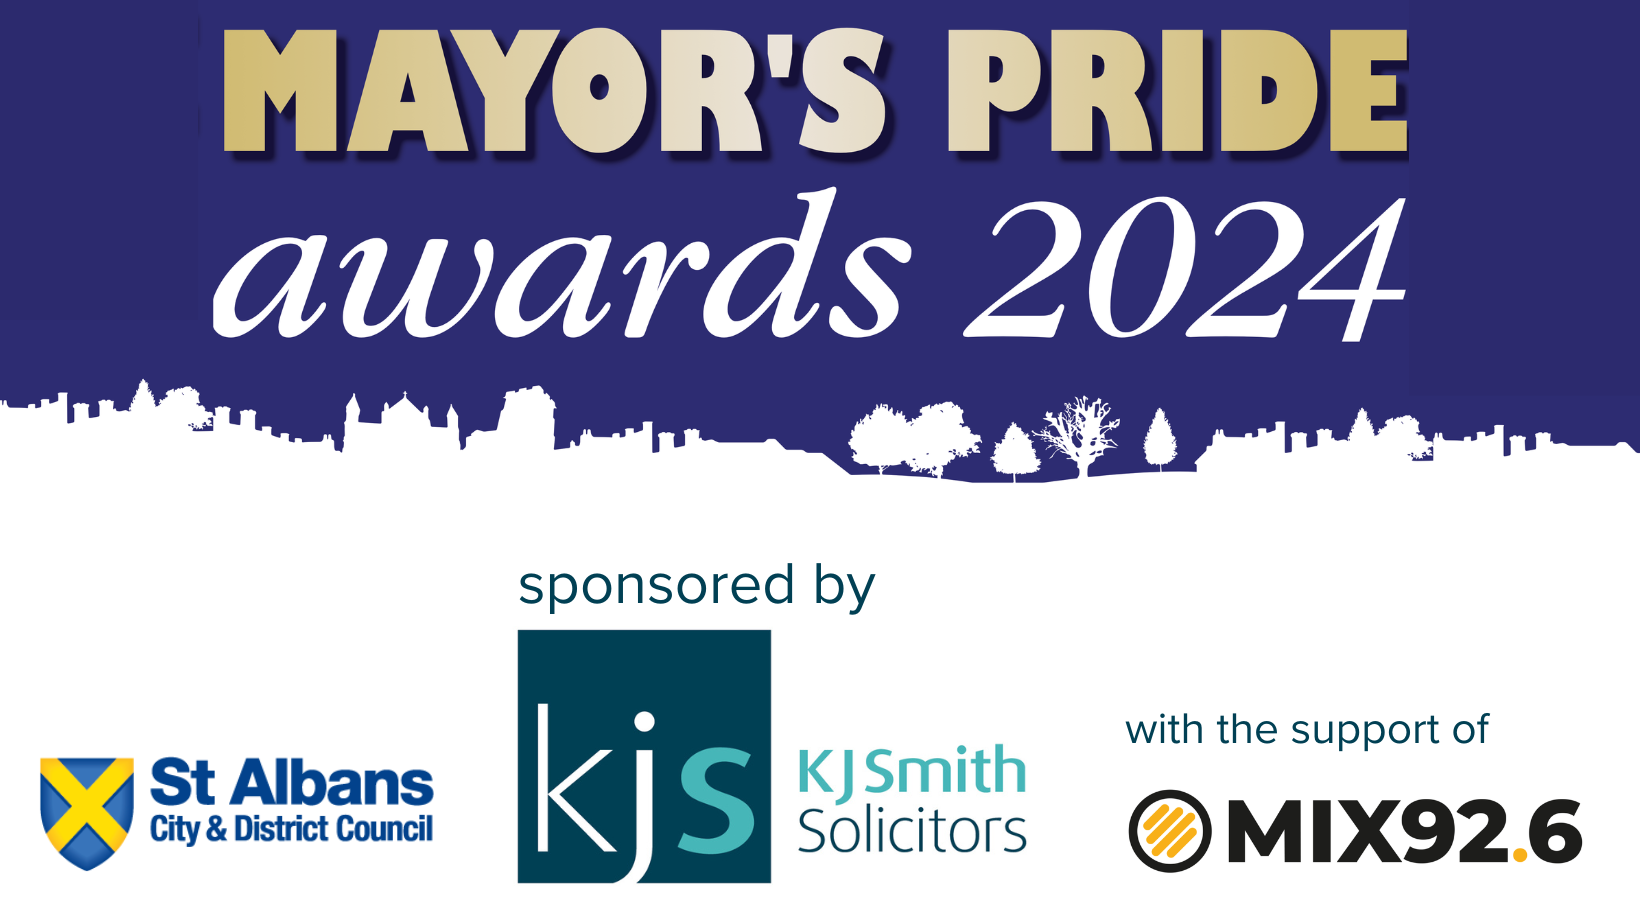 Mayor's Pride banner sponsored by KJ Smith with the support of Mix 92.6